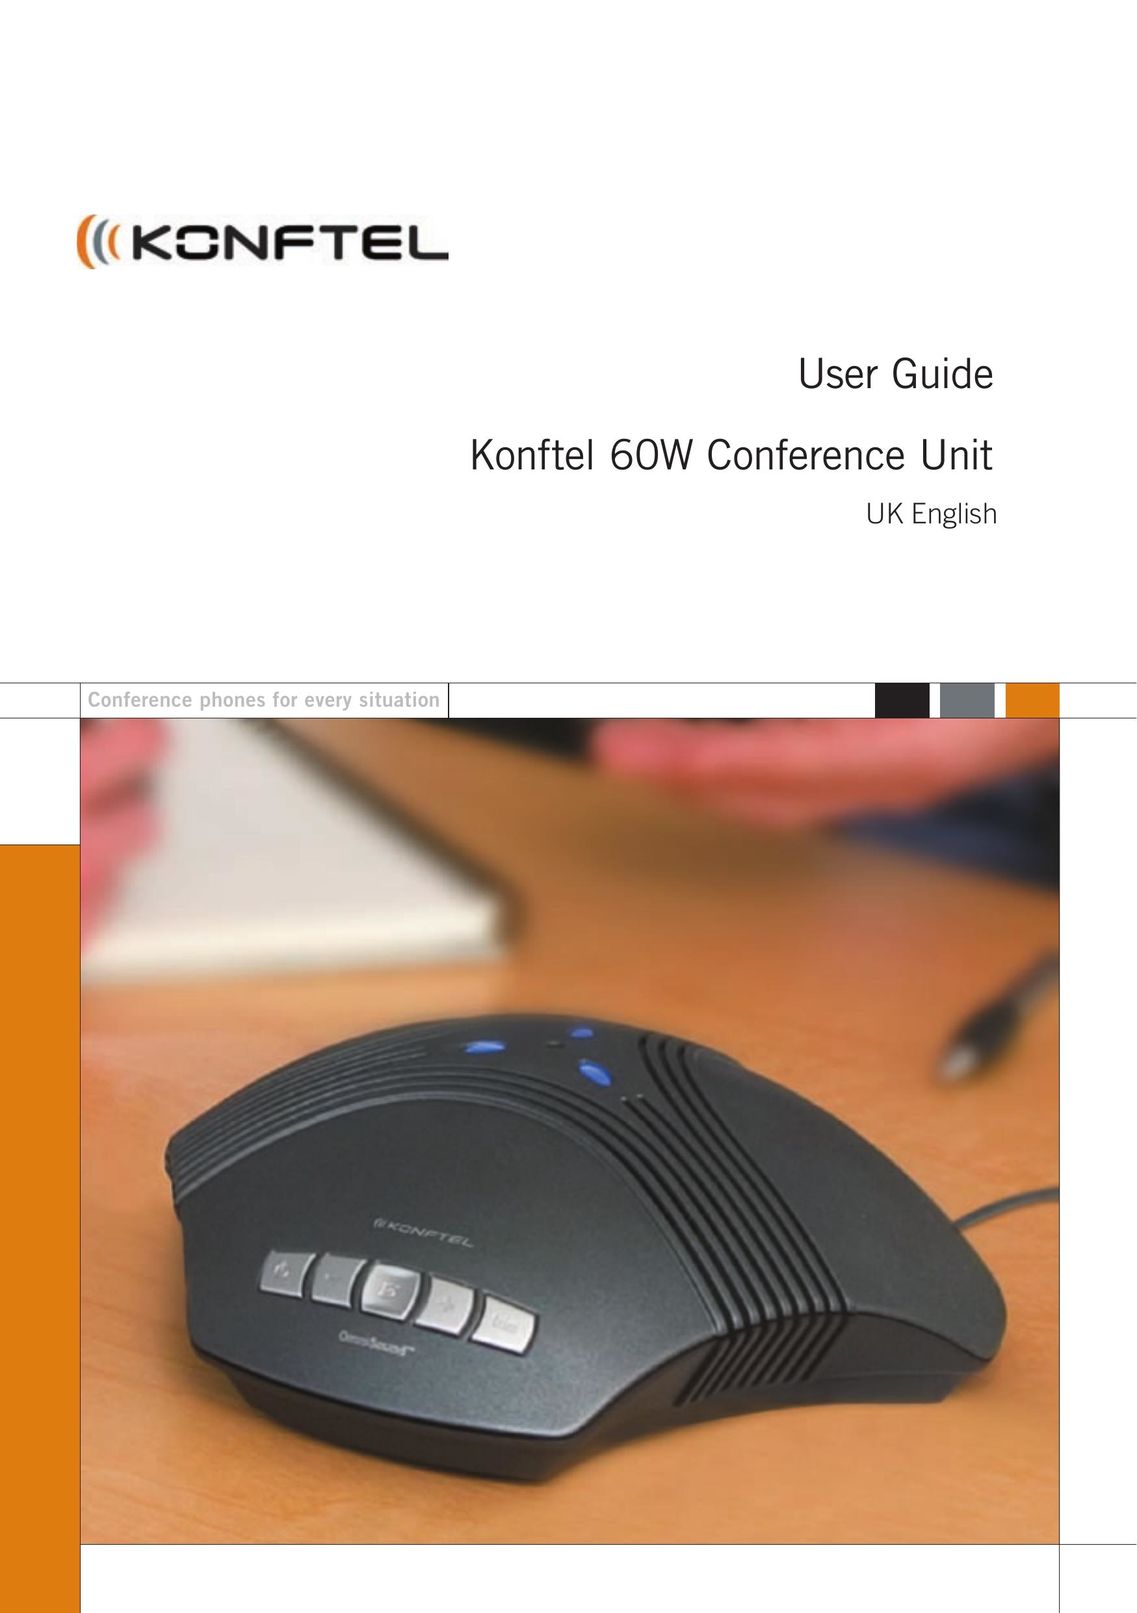 Konftel 60W Conference Phone User Manual